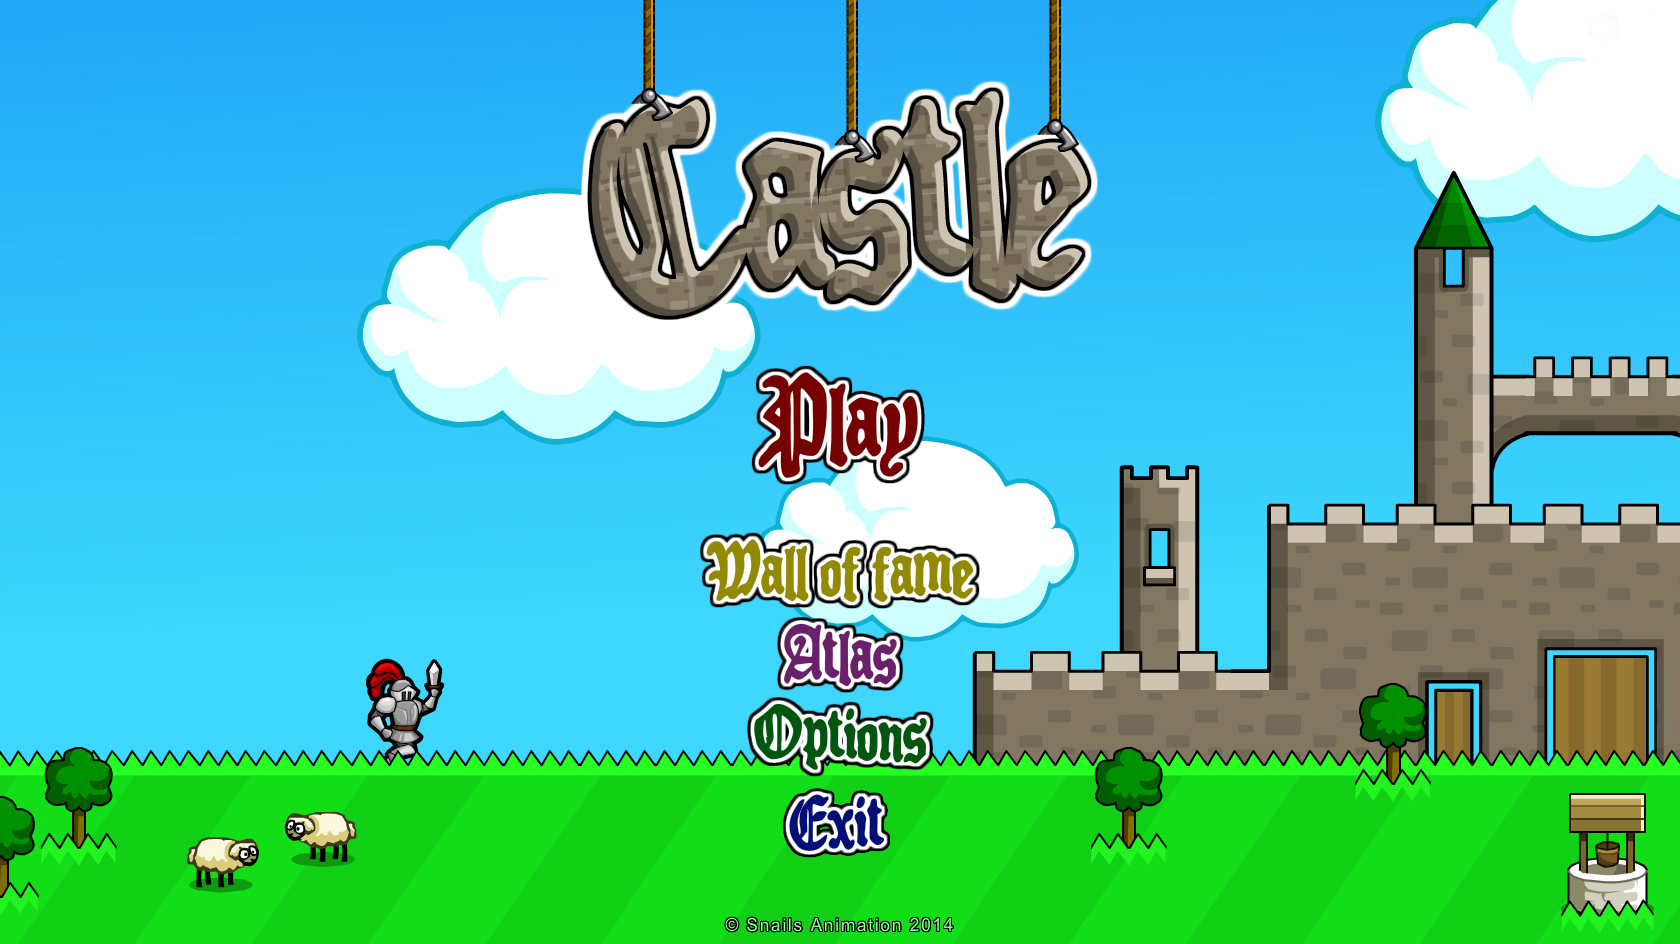 Castle : Game Review